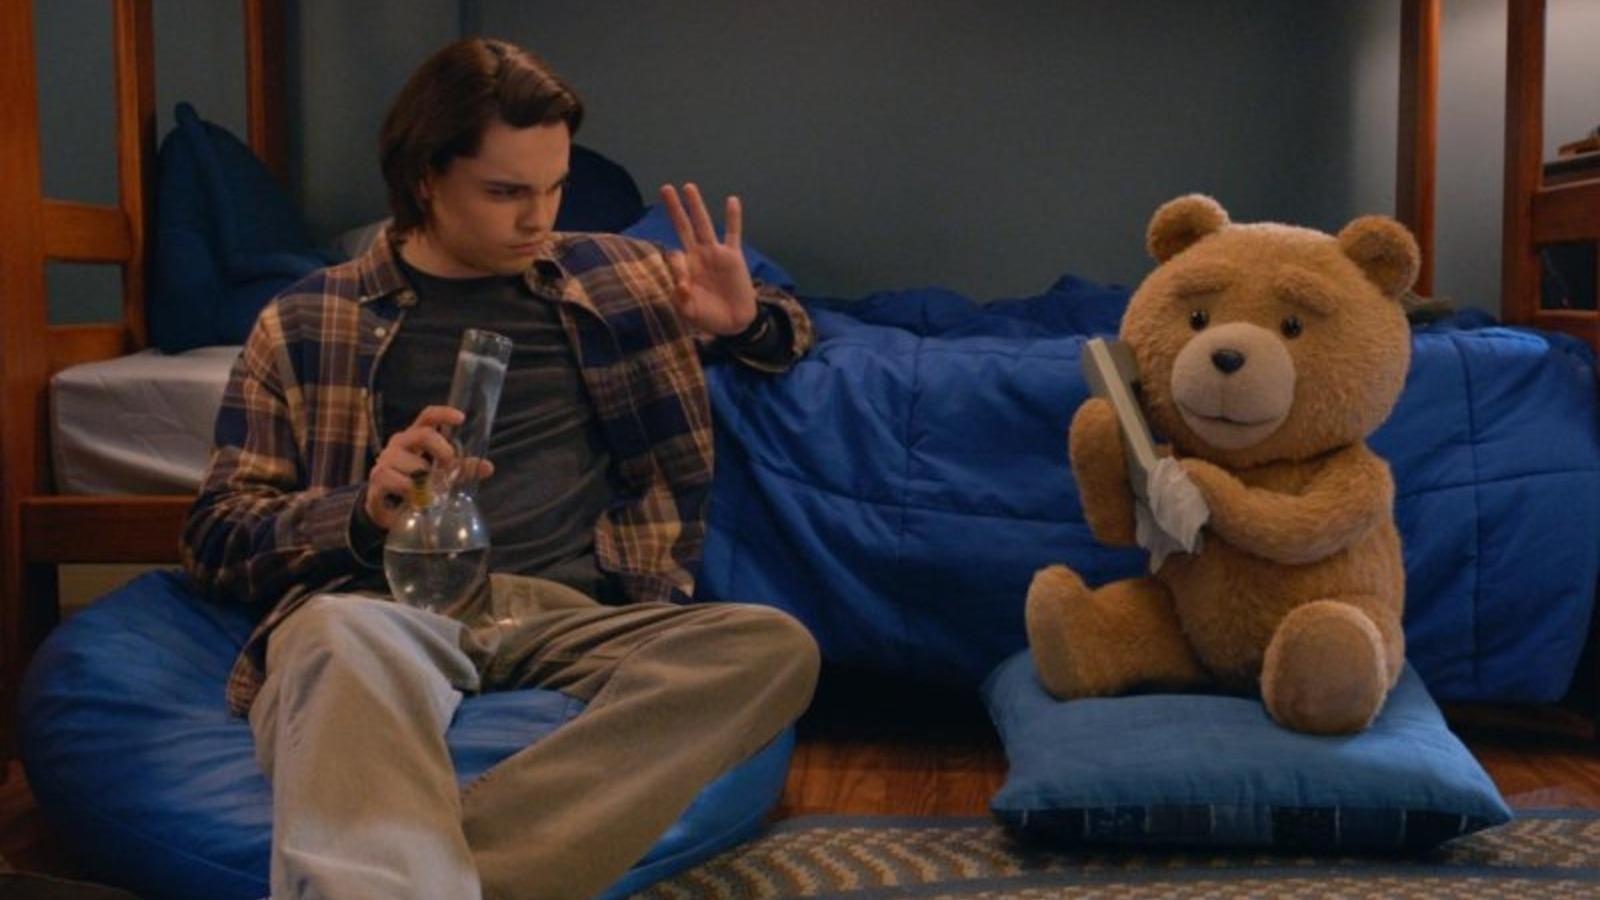 Ted and John in Ted the series